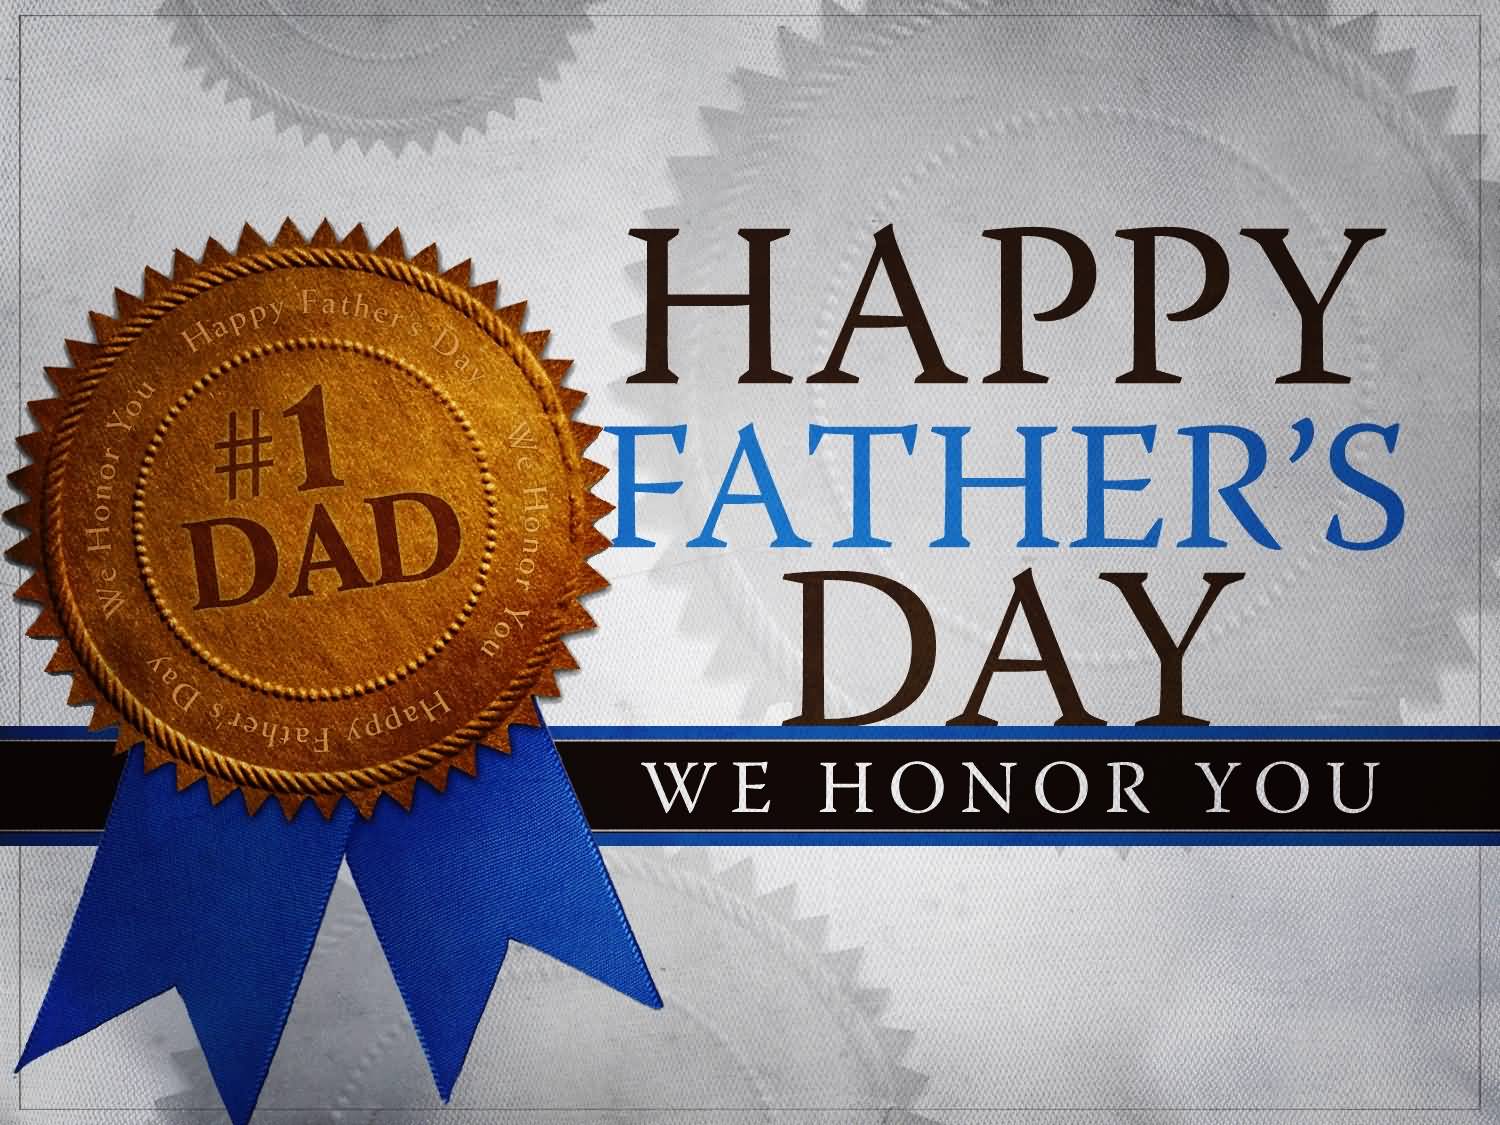 We honor You Dad – Happy Fathers Day